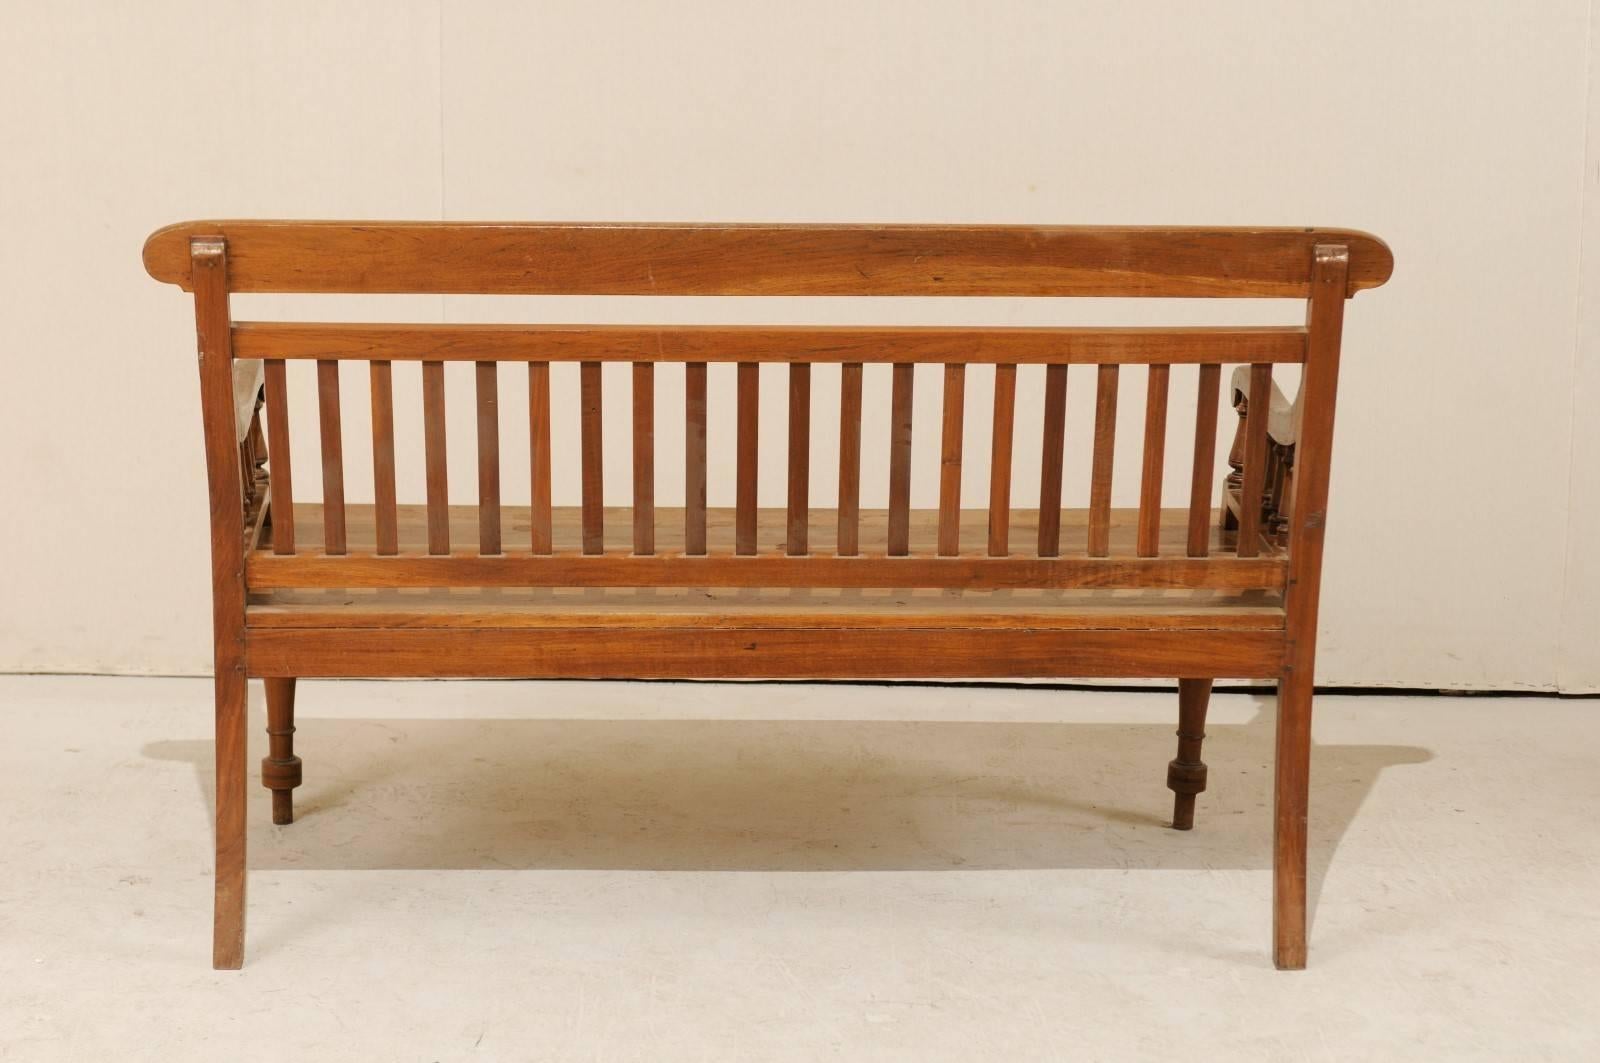 British Colonial Style Teak Wood Bench with Slats on the Backrest & Turned Legs 1